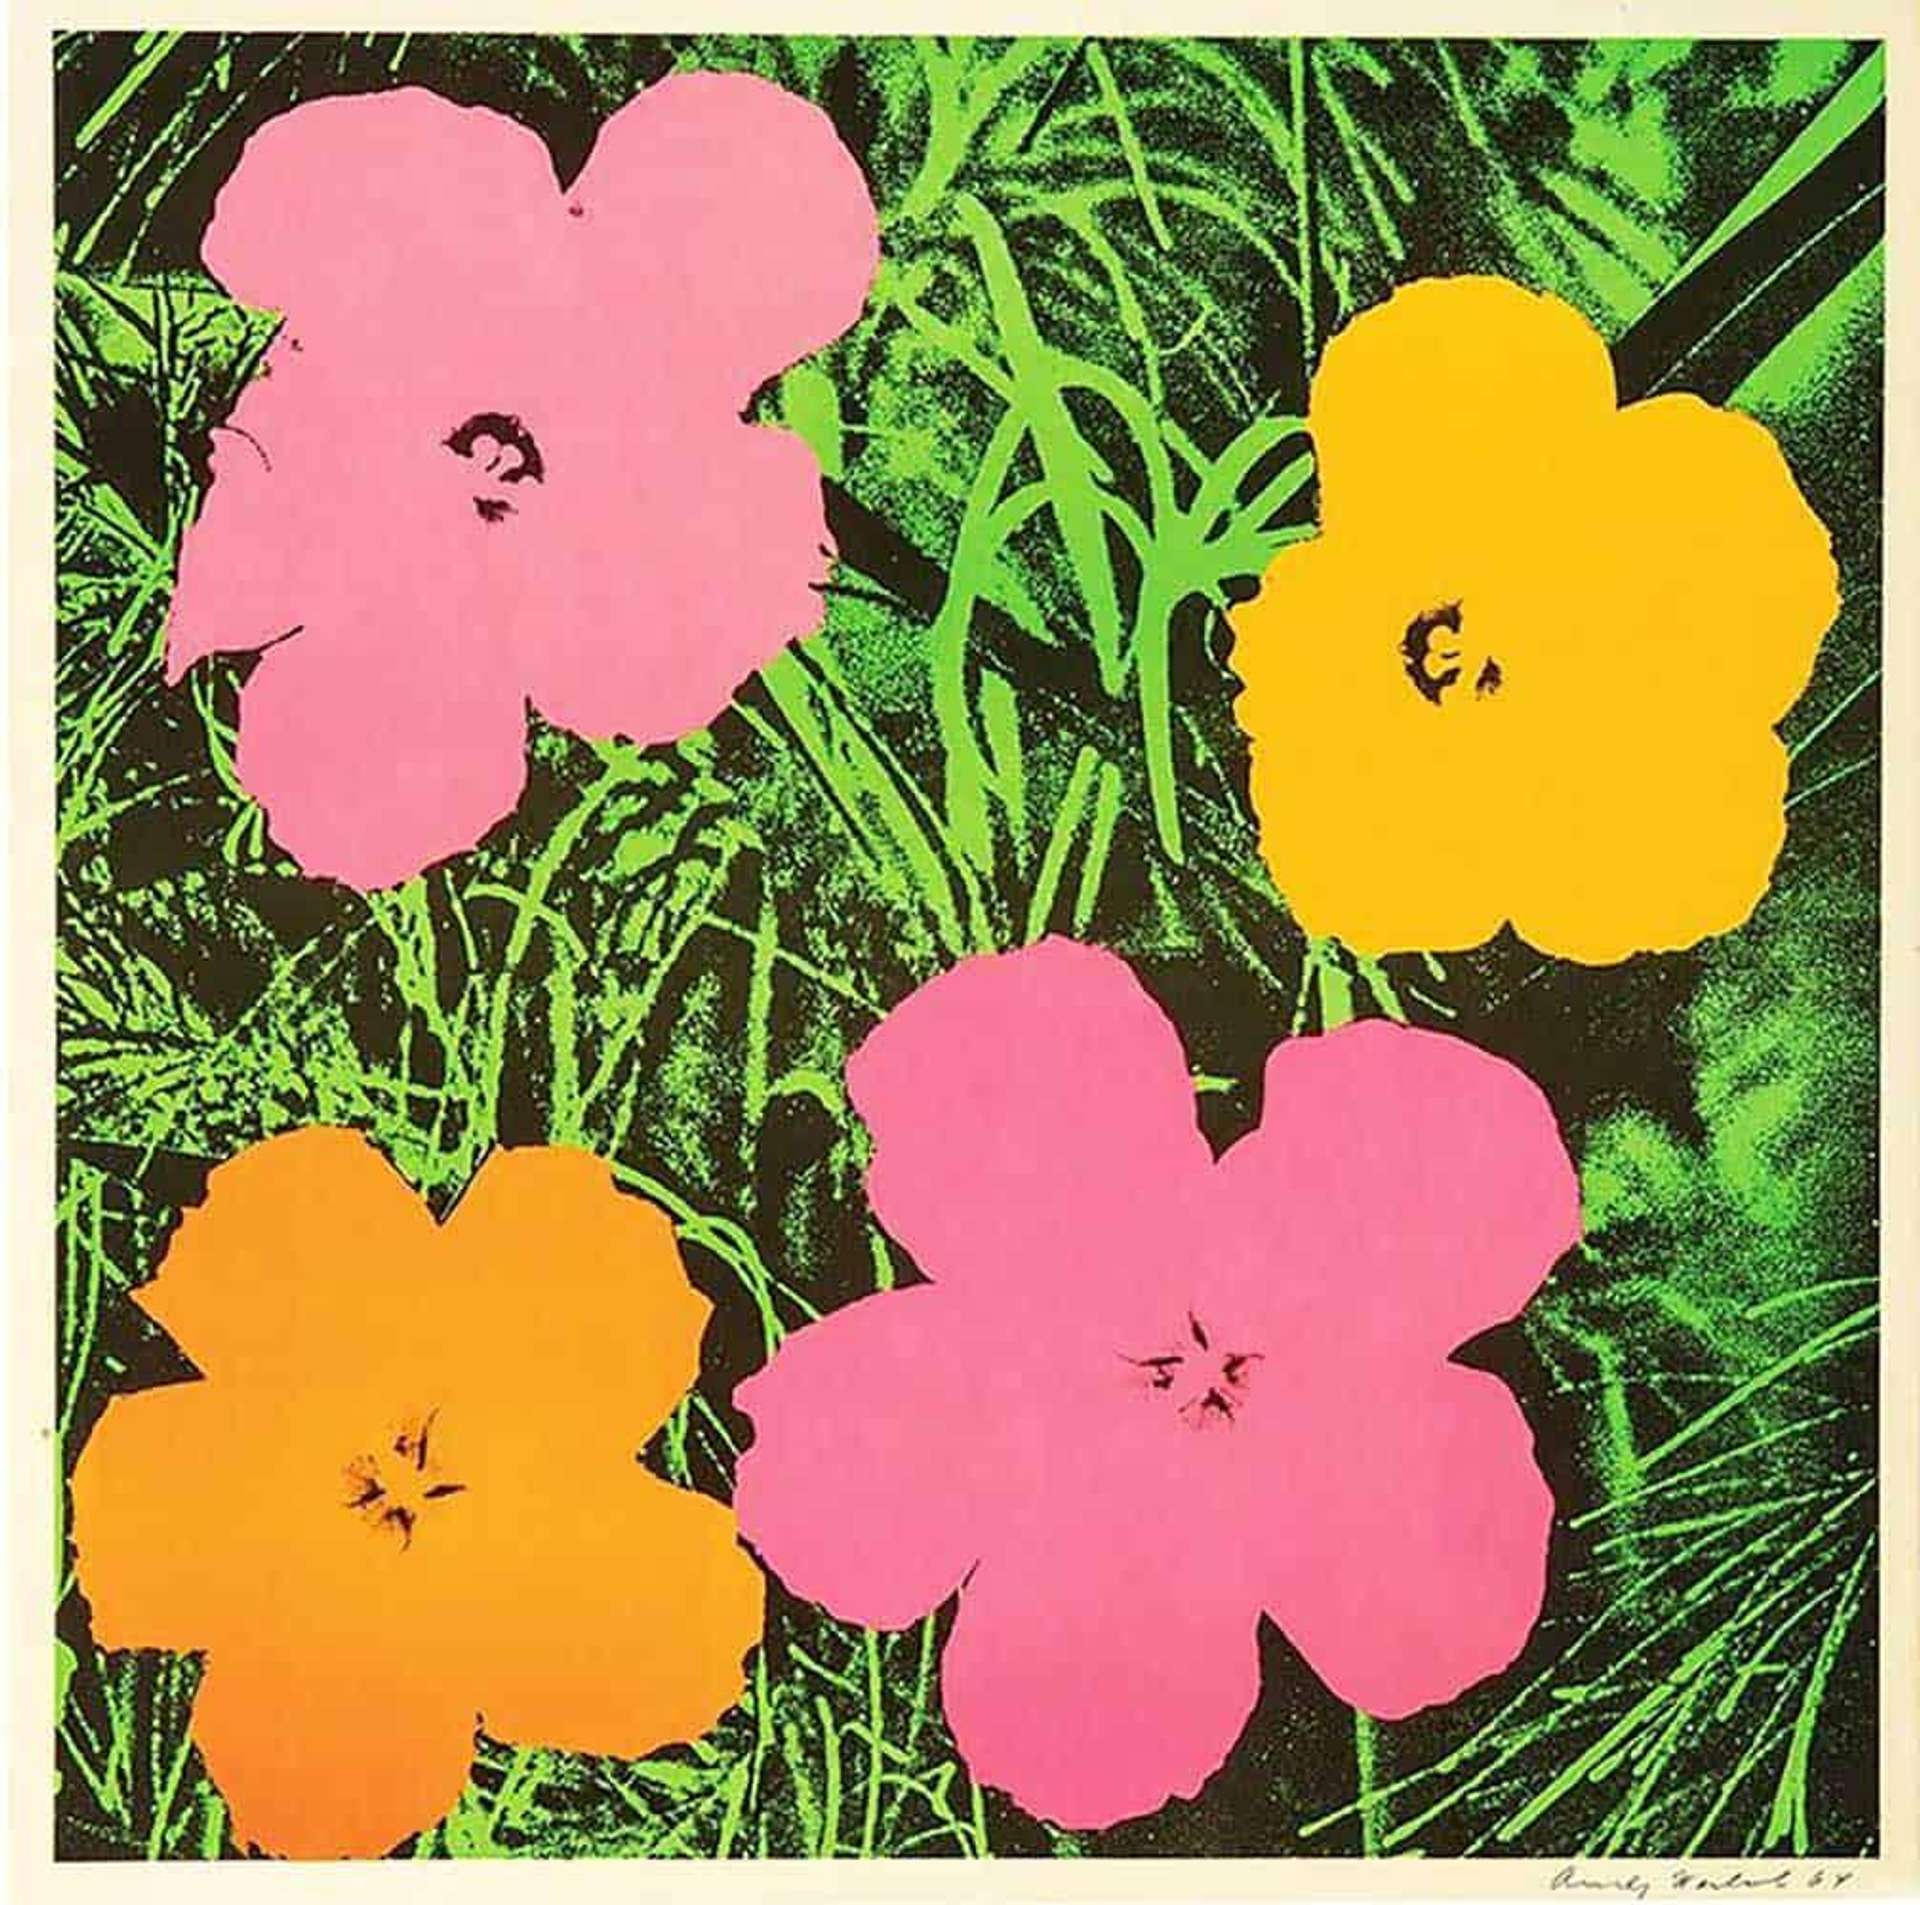 An offset lithograph by Andy Warhol depicting pink, orange and yellow flowers against a green bed of grass.